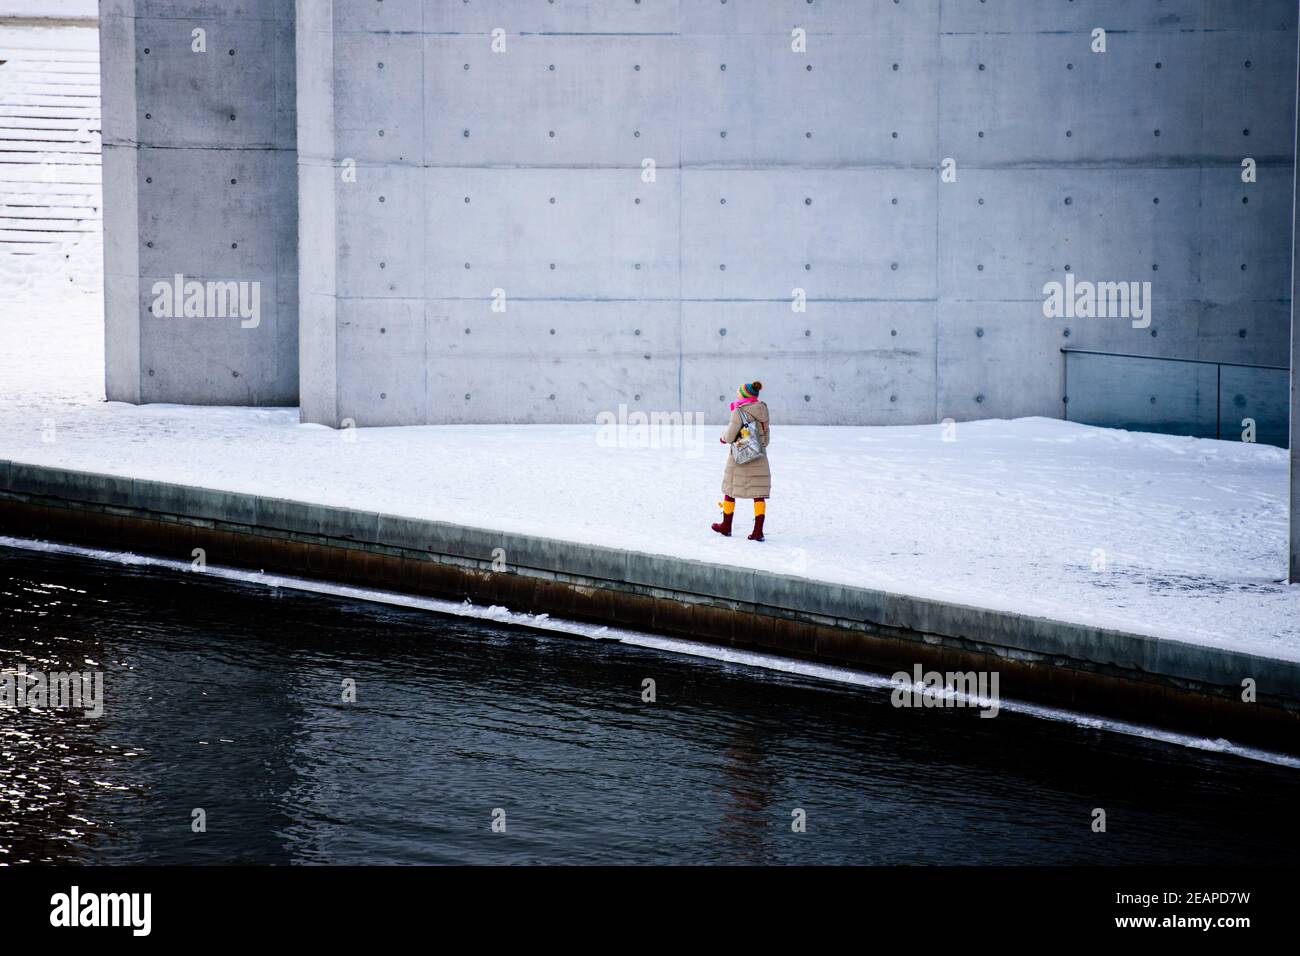 Berlin, Berlin, Germany. 10th Feb, 2021. A single person walks through snow in the government district of central Berlin. A weather phenomenon called the polar vortex split brought snow and icy winds to Berlin and Brandenburg with temperatures well below freezing. Credit: Jan Scheunert/ZUMA Wire/Alamy Live News Stock Photo